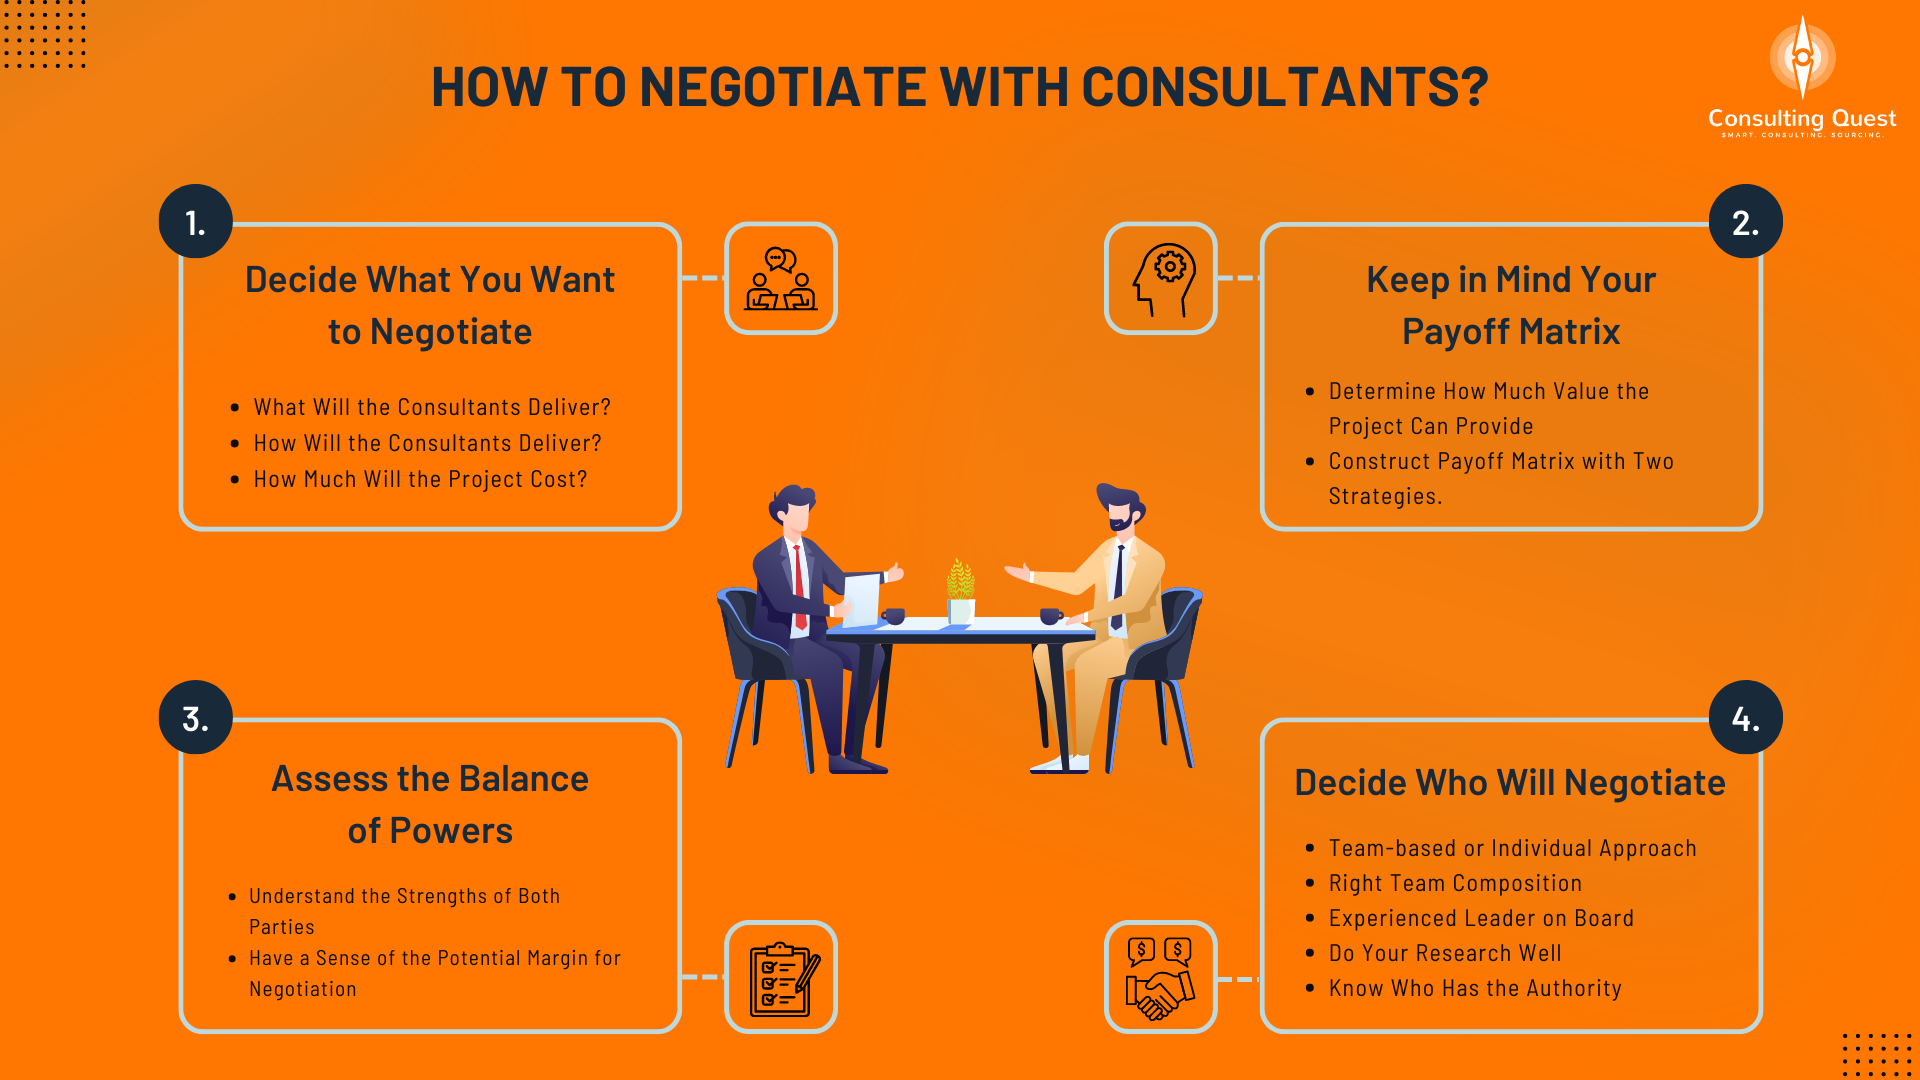 How To Negotiate with Consultants